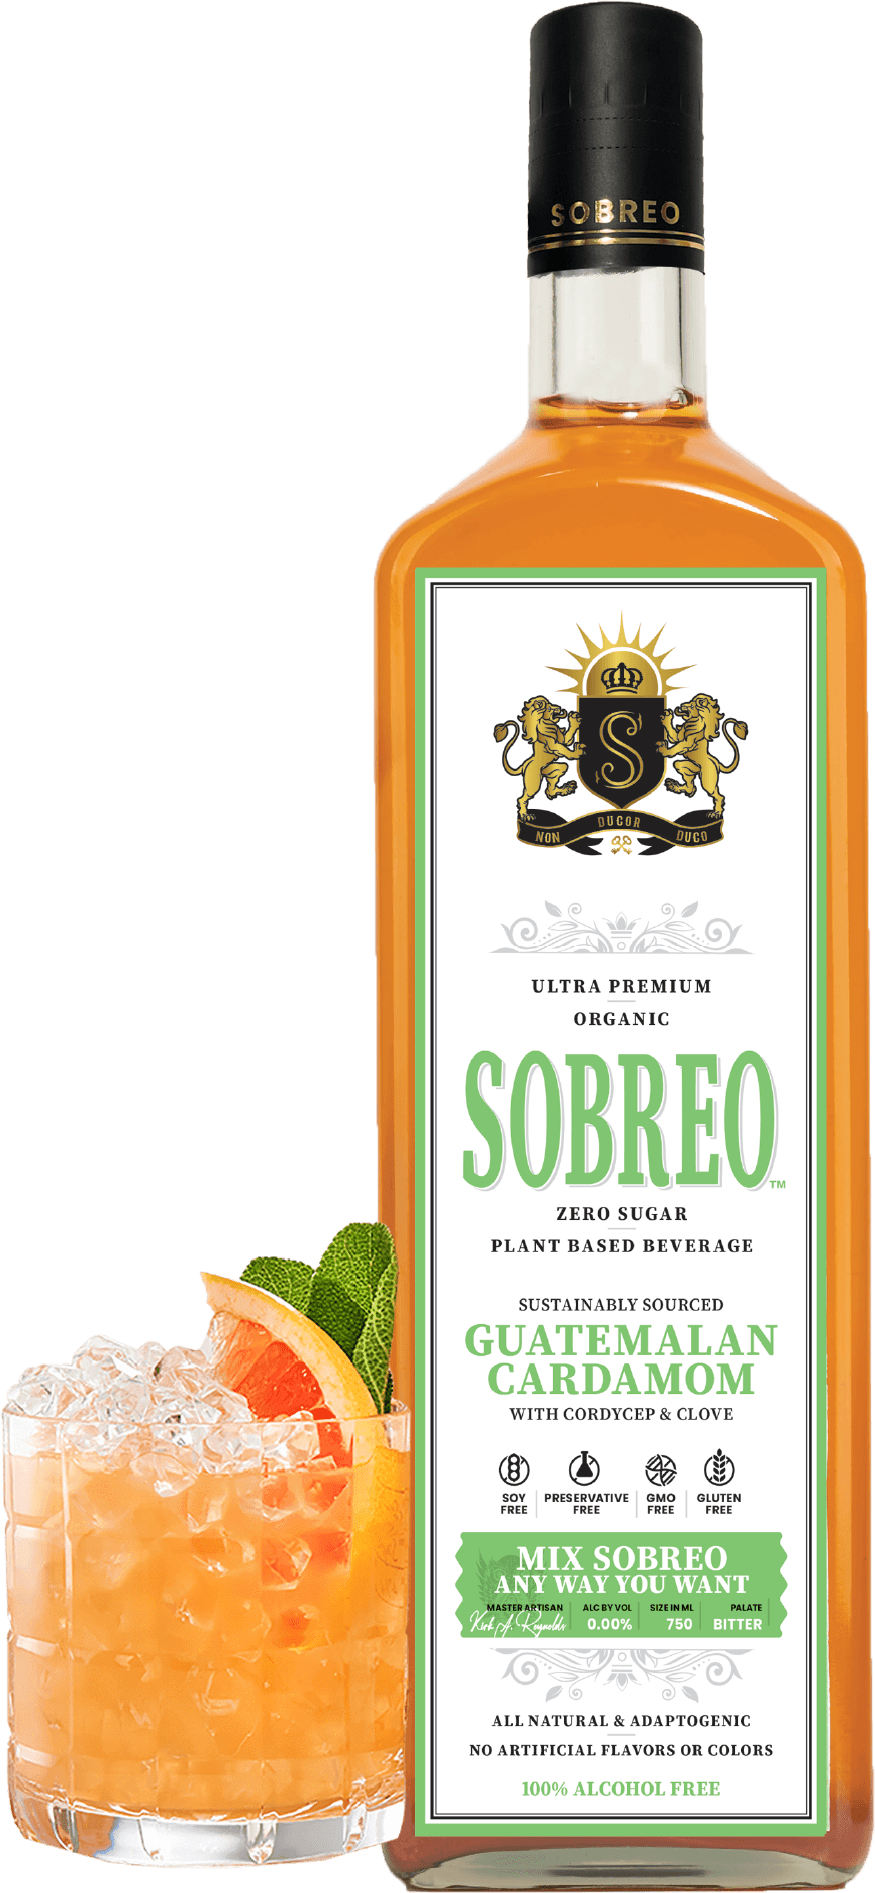 Sobreo non alcoholic cocktail and mocktail mixer in Guatemalan Cardamom Bitter flavor perfect to infuse into an Negroni Sbagliato recipe